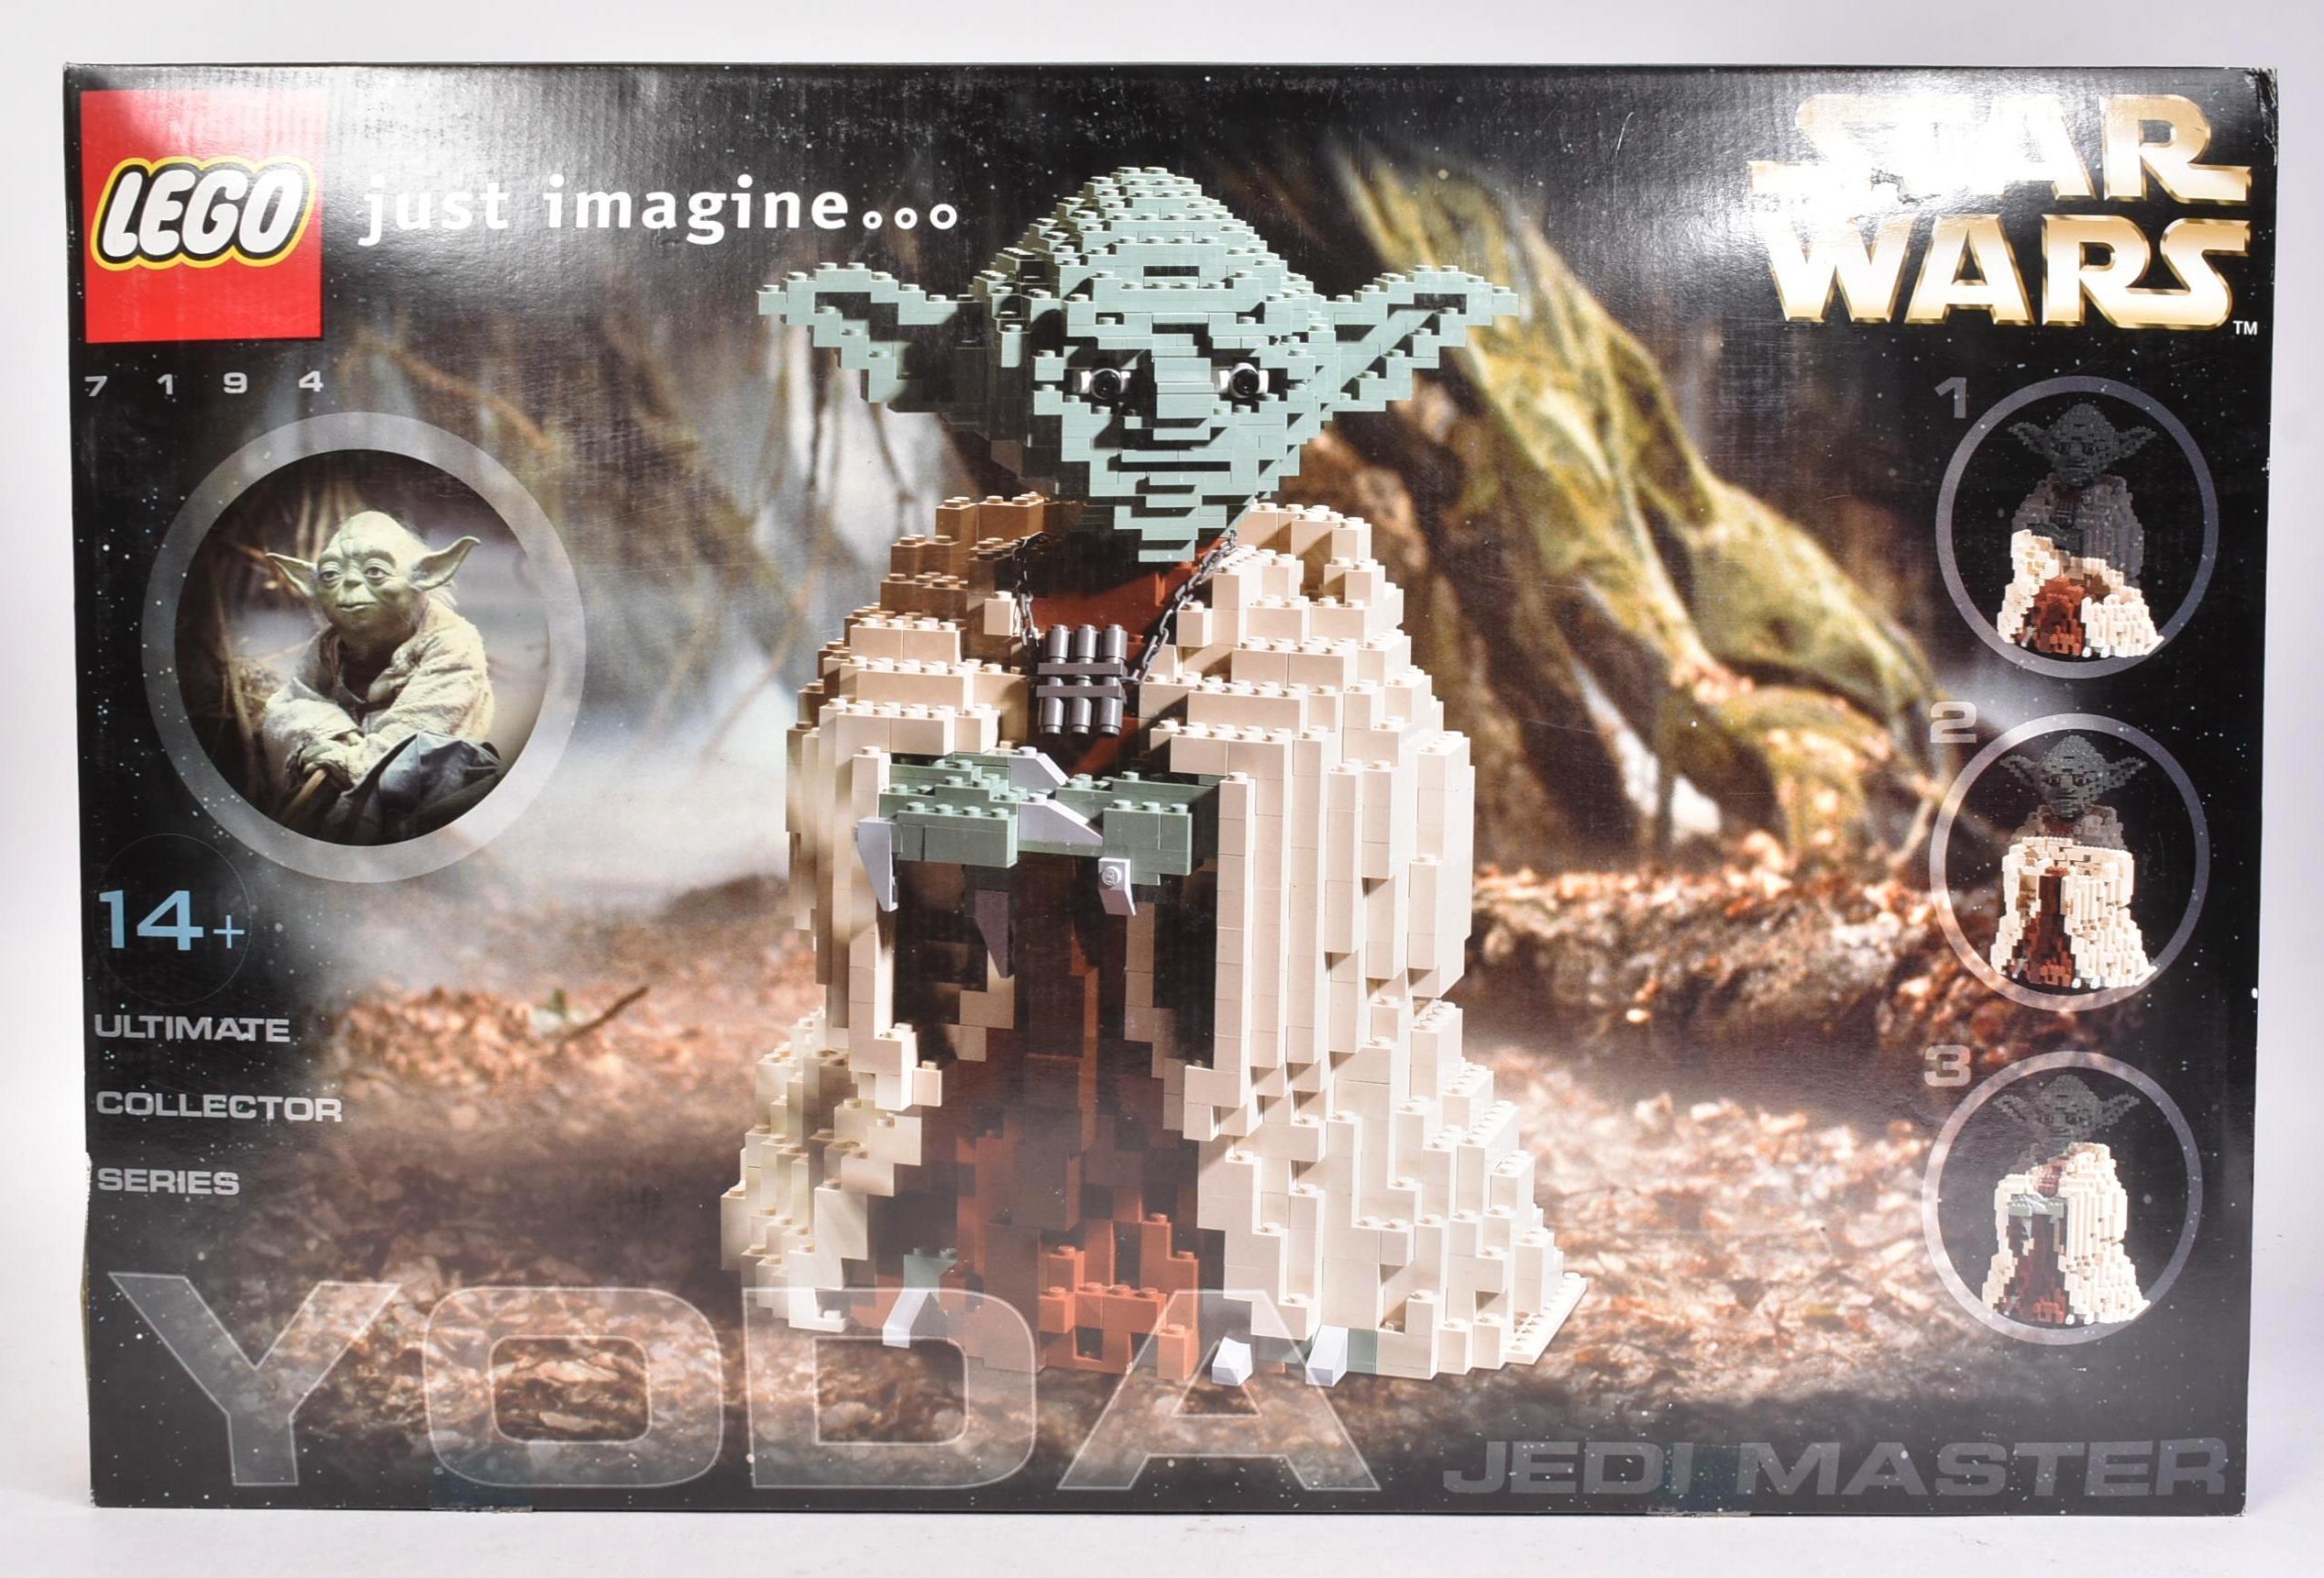 LEGO - STAR WARS - ULTIMATE COLLECTOR SERIES - YODA - Image 2 of 4